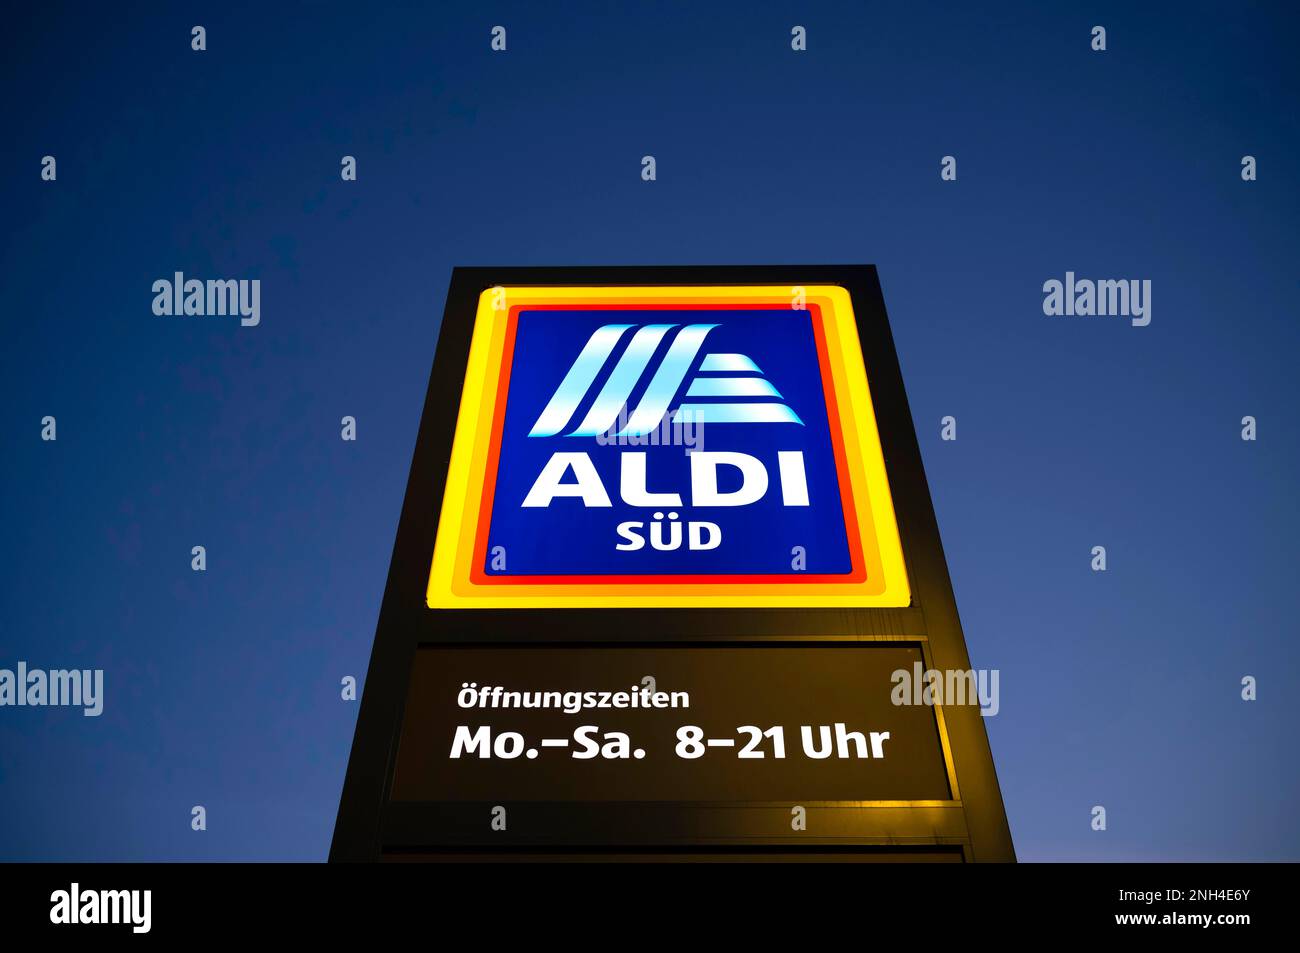 Opening hours ALDI Sued, retail chain, grocery shop, logo on sign, blue hour, Stuttgart, Baden-Wuerttemberg, Germany Stock Photo